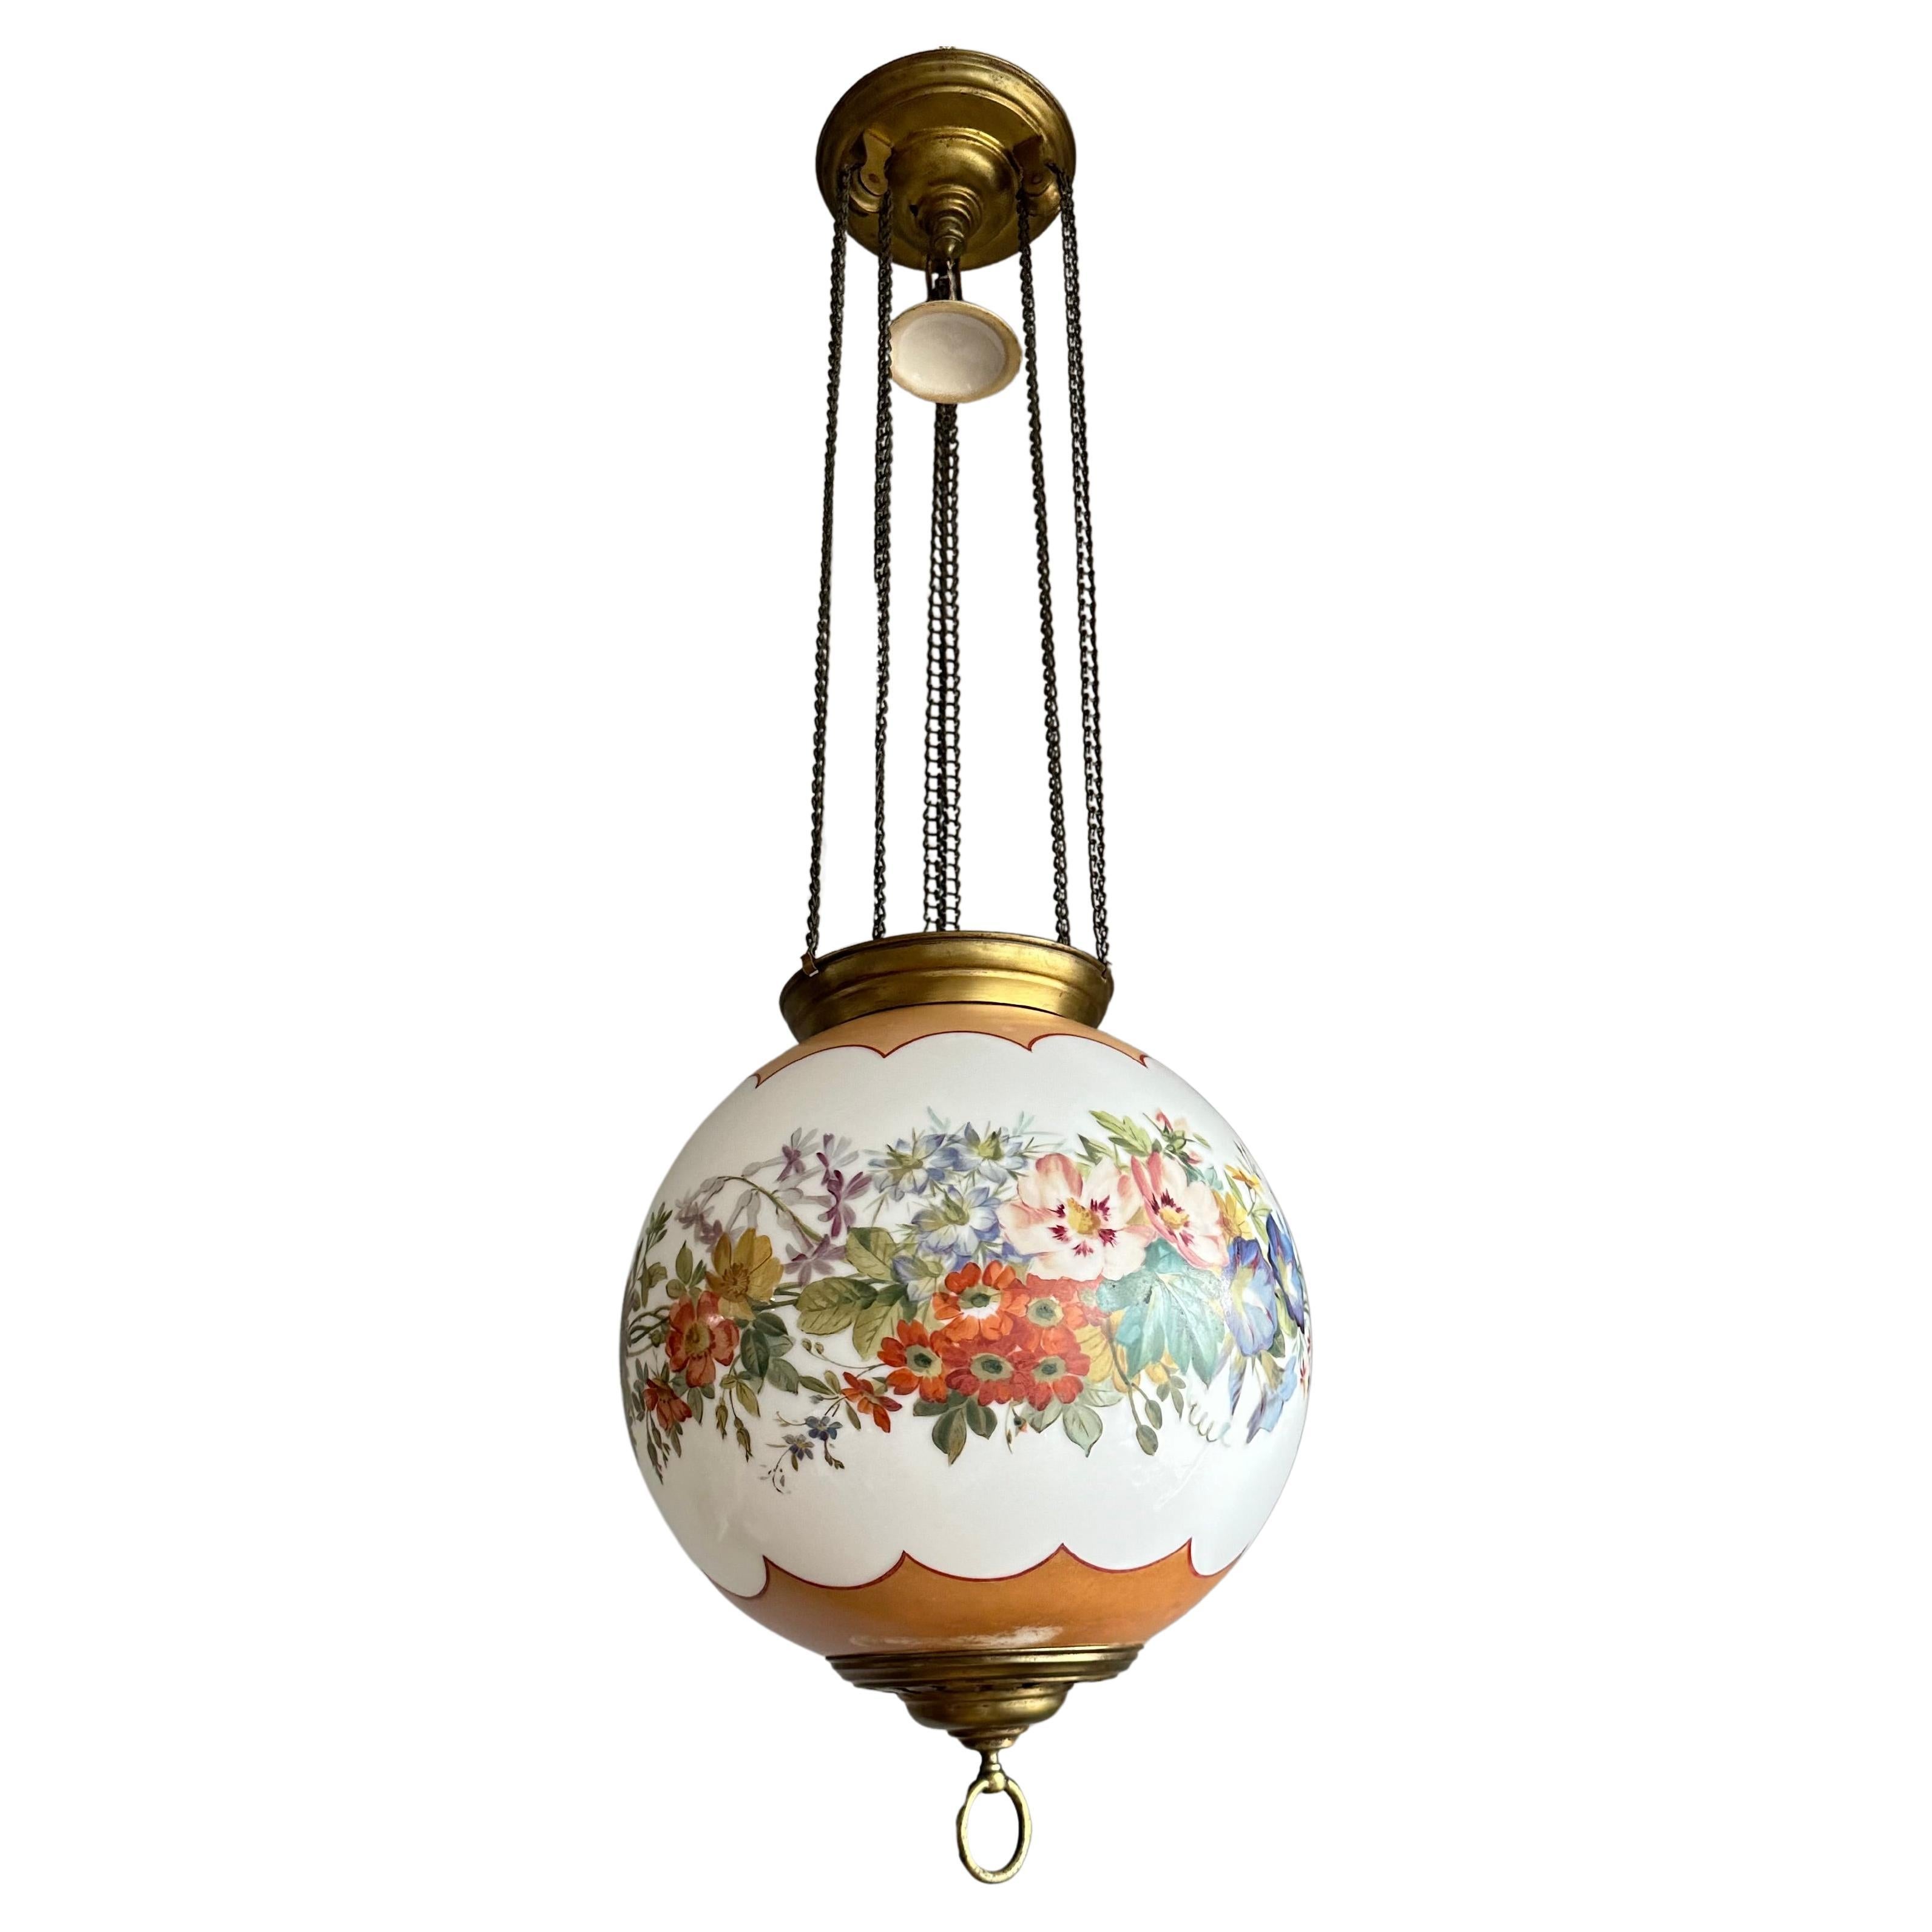 Antique Round Opaline Glass Shade Pendant Light with Wreath of Flowers Decor For Sale